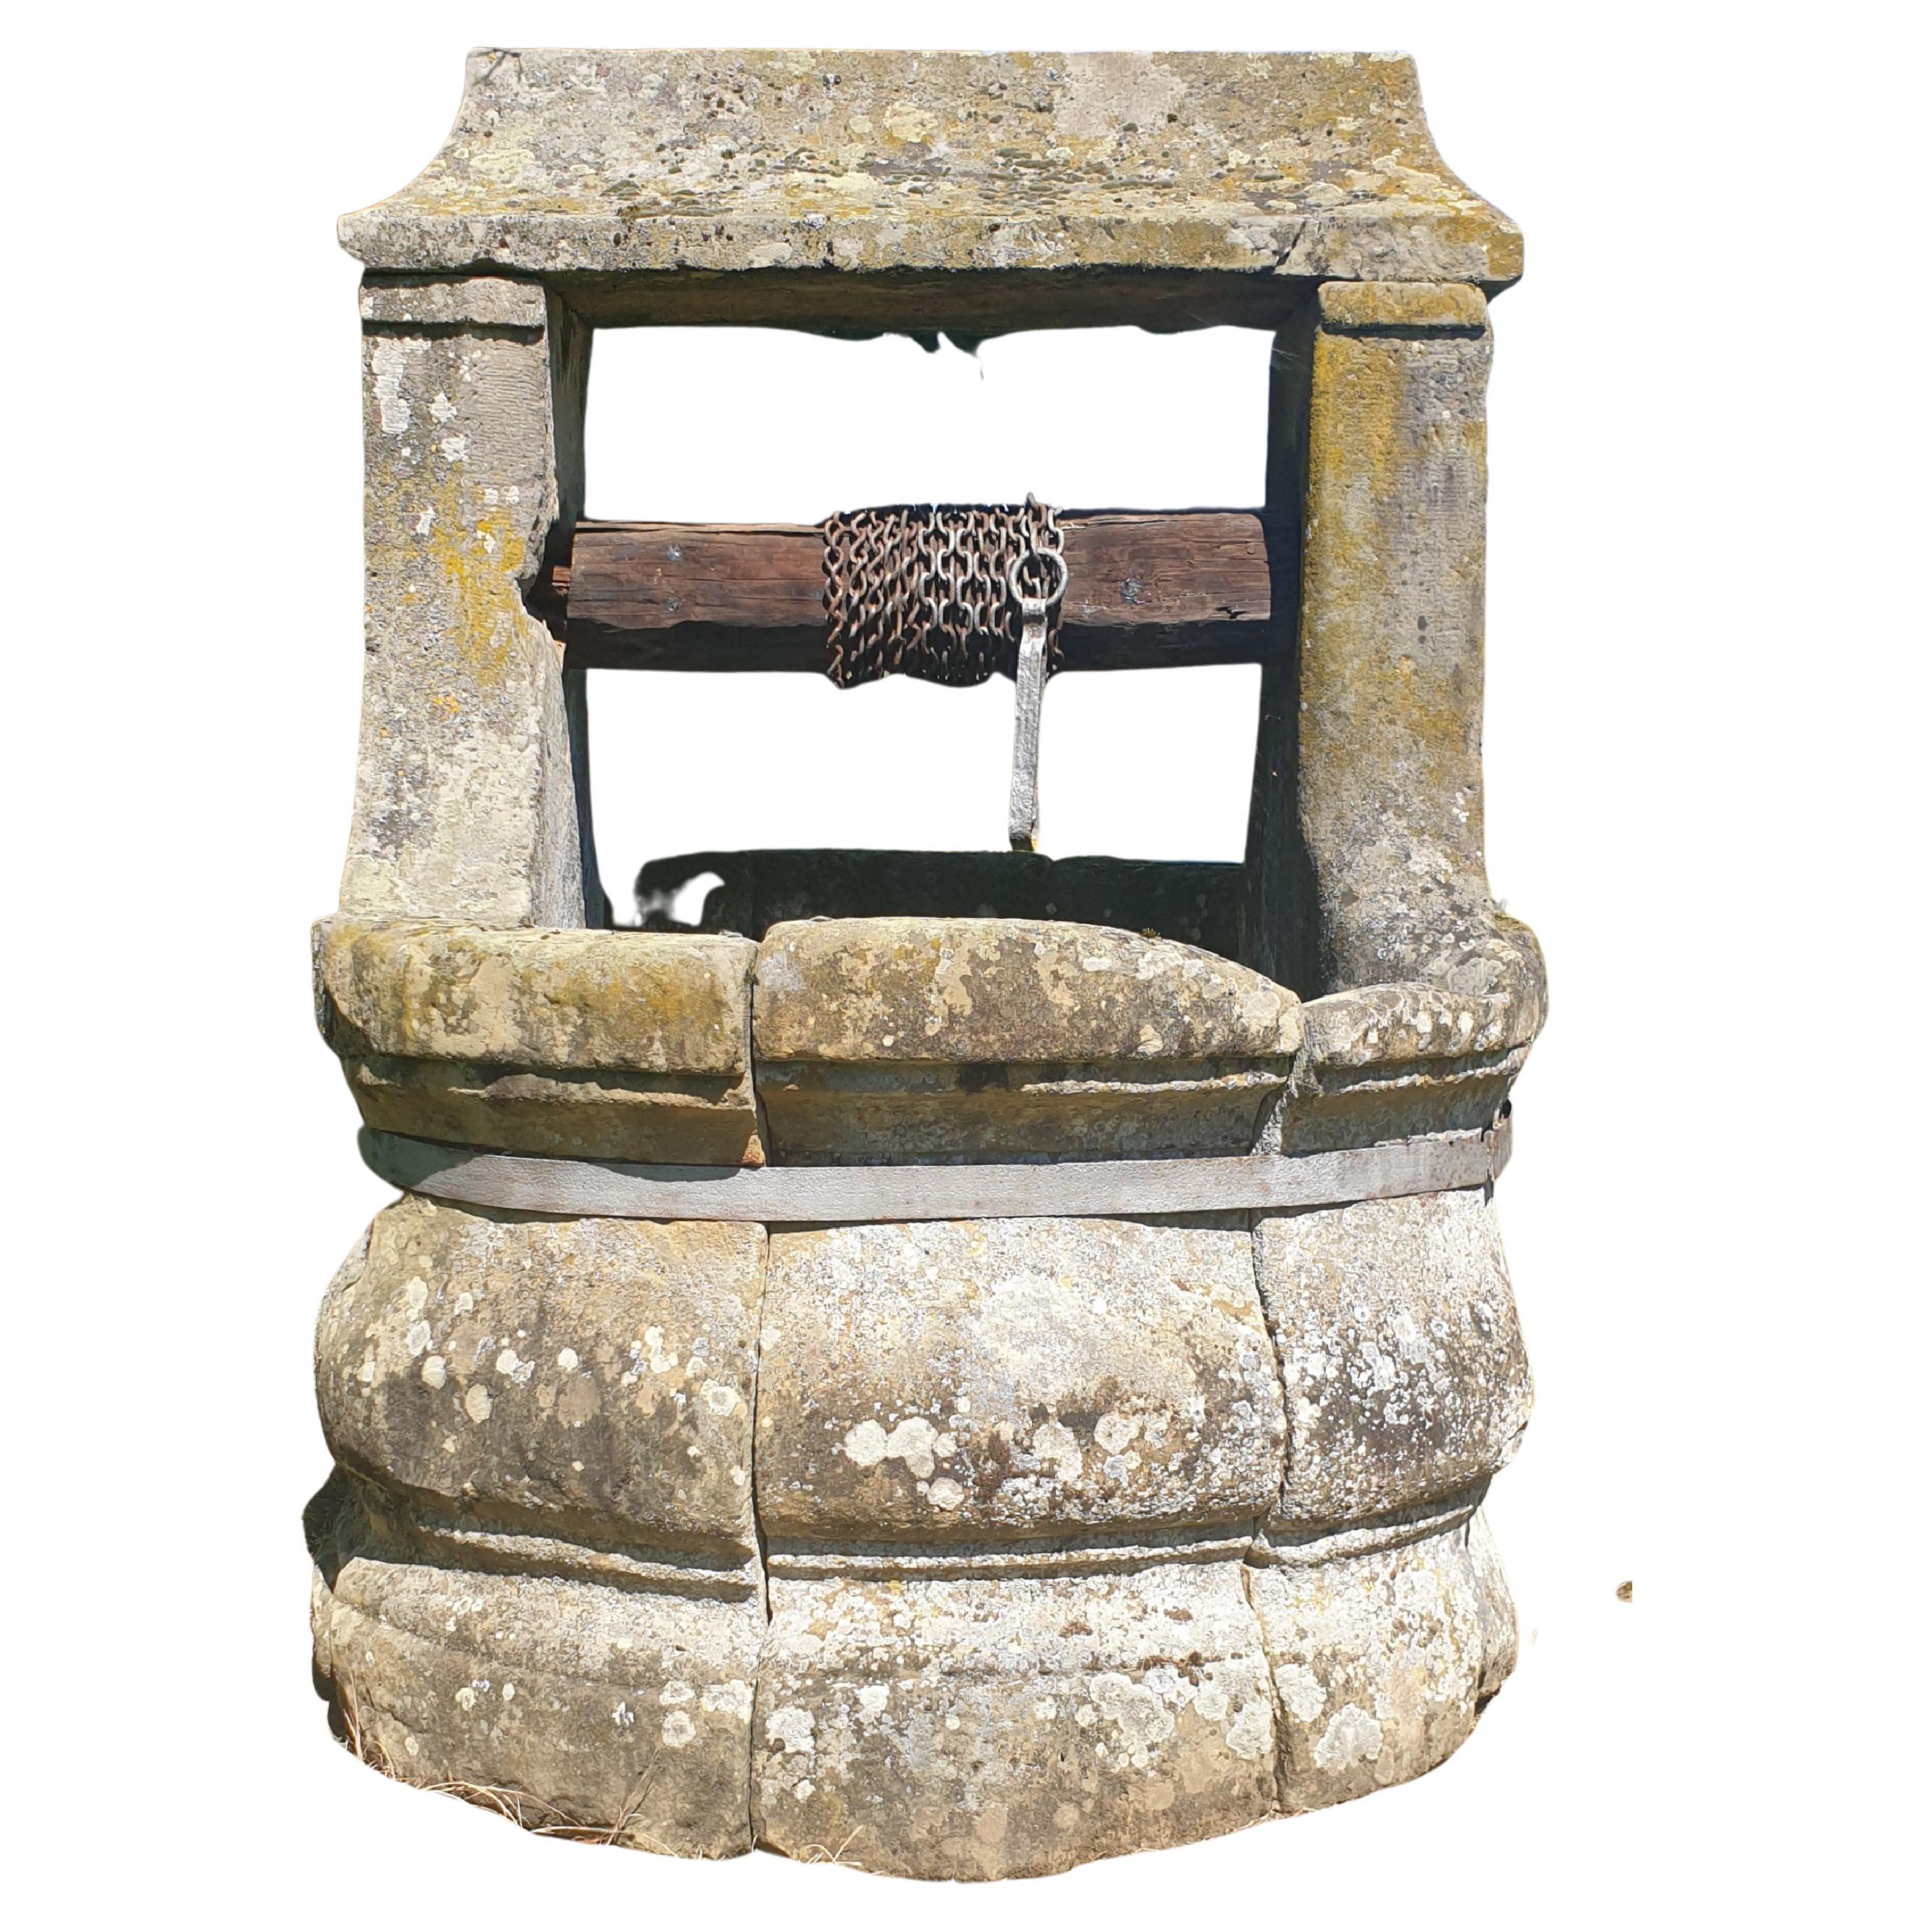 Stone Well from the Louis XIV Period